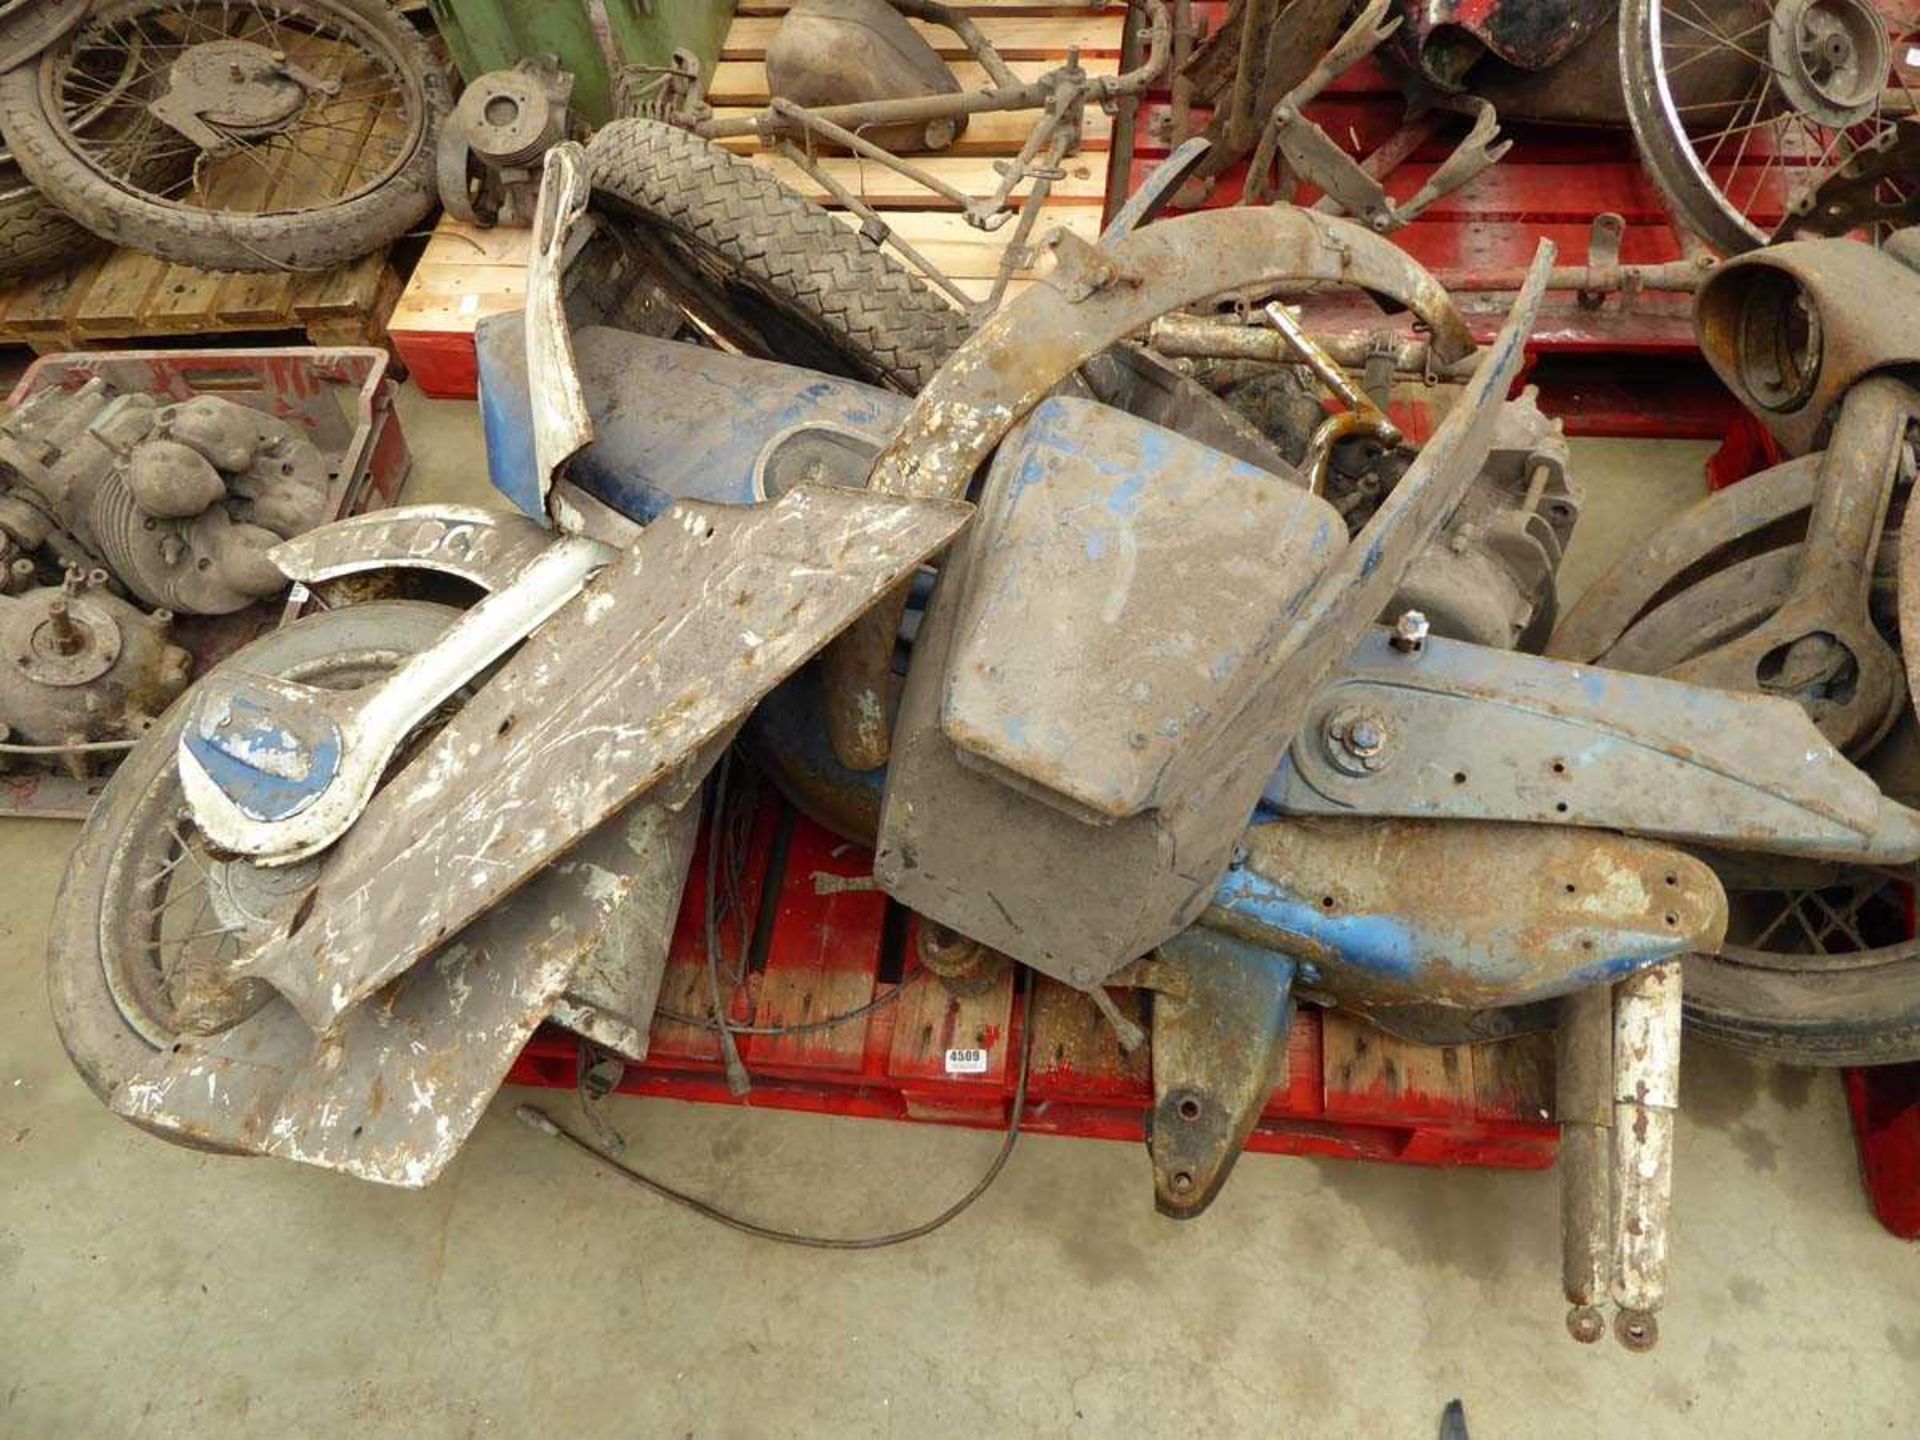 Pallet containing vintage motorcycle frame, spare parts, including wheels and covers